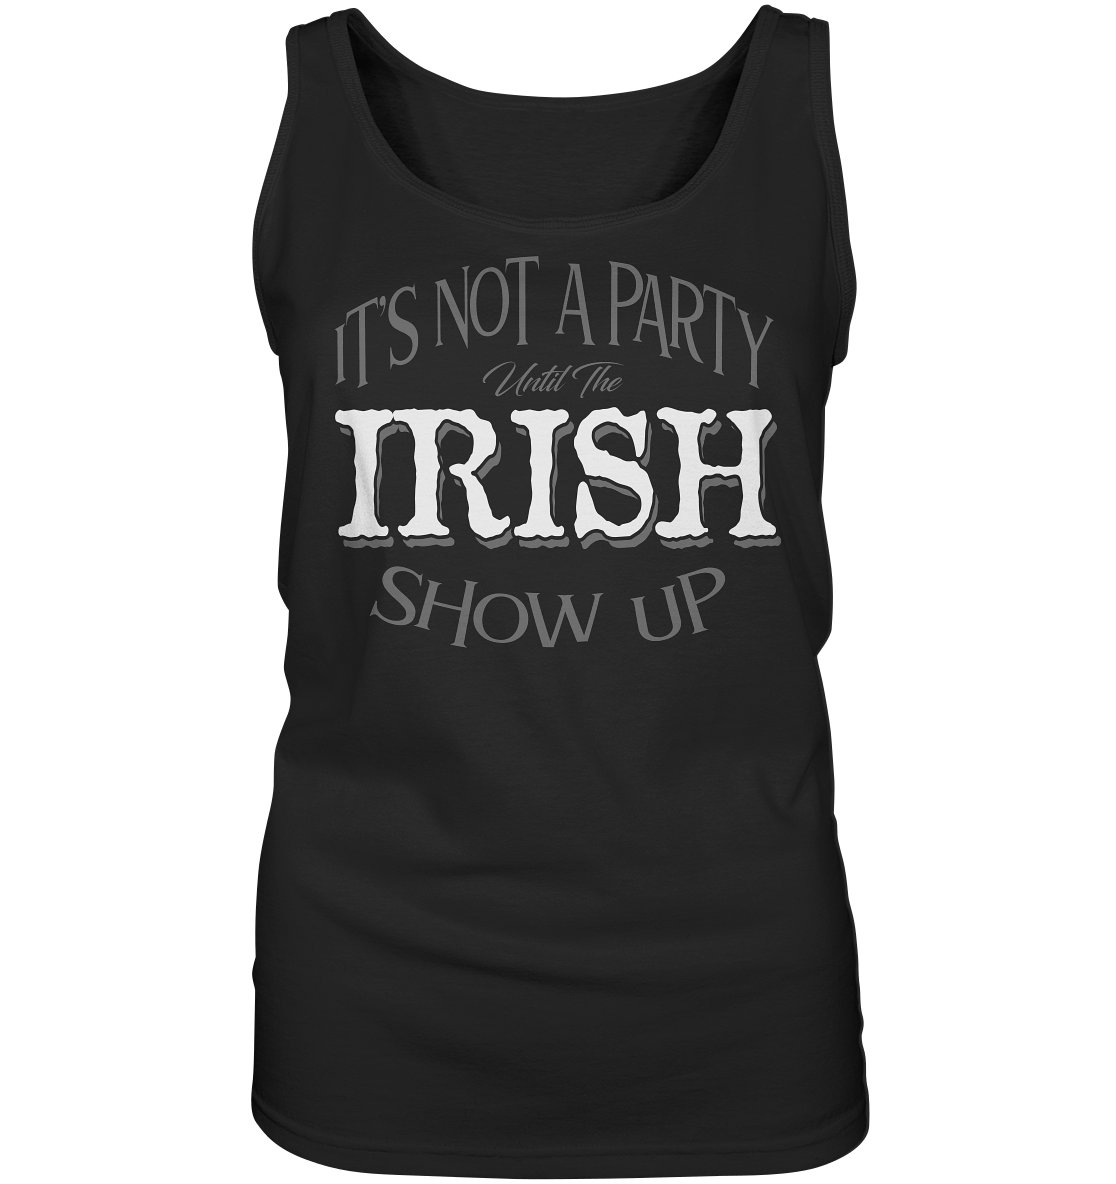 It's Not A Party Until The Irish Show Up - Ladies Tank-Top